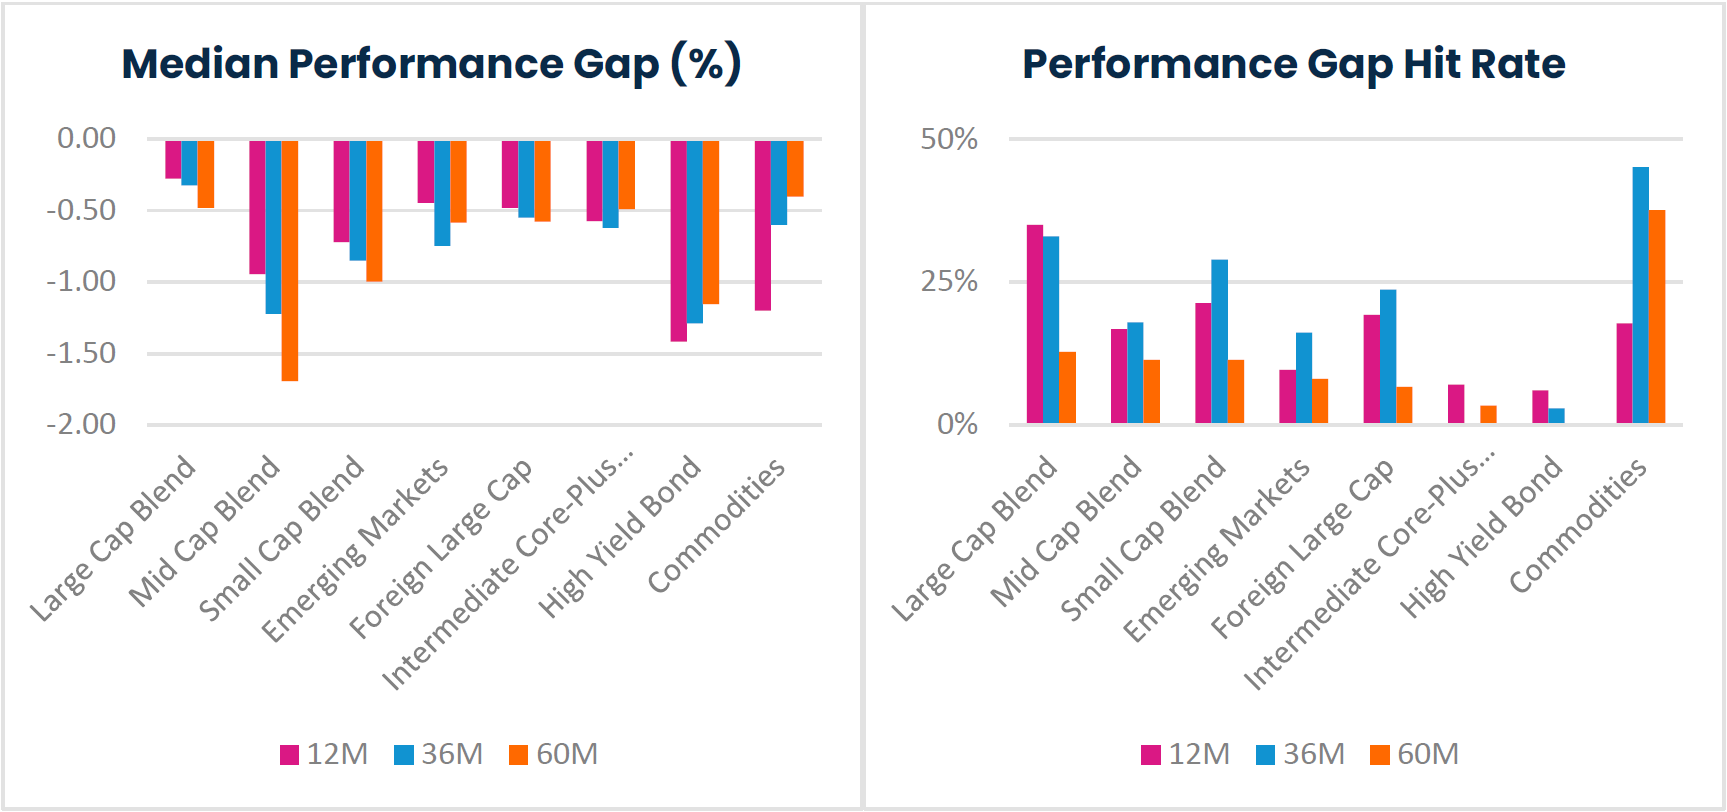 Median Performance Gap (%) and Performance Gap Hit Rate